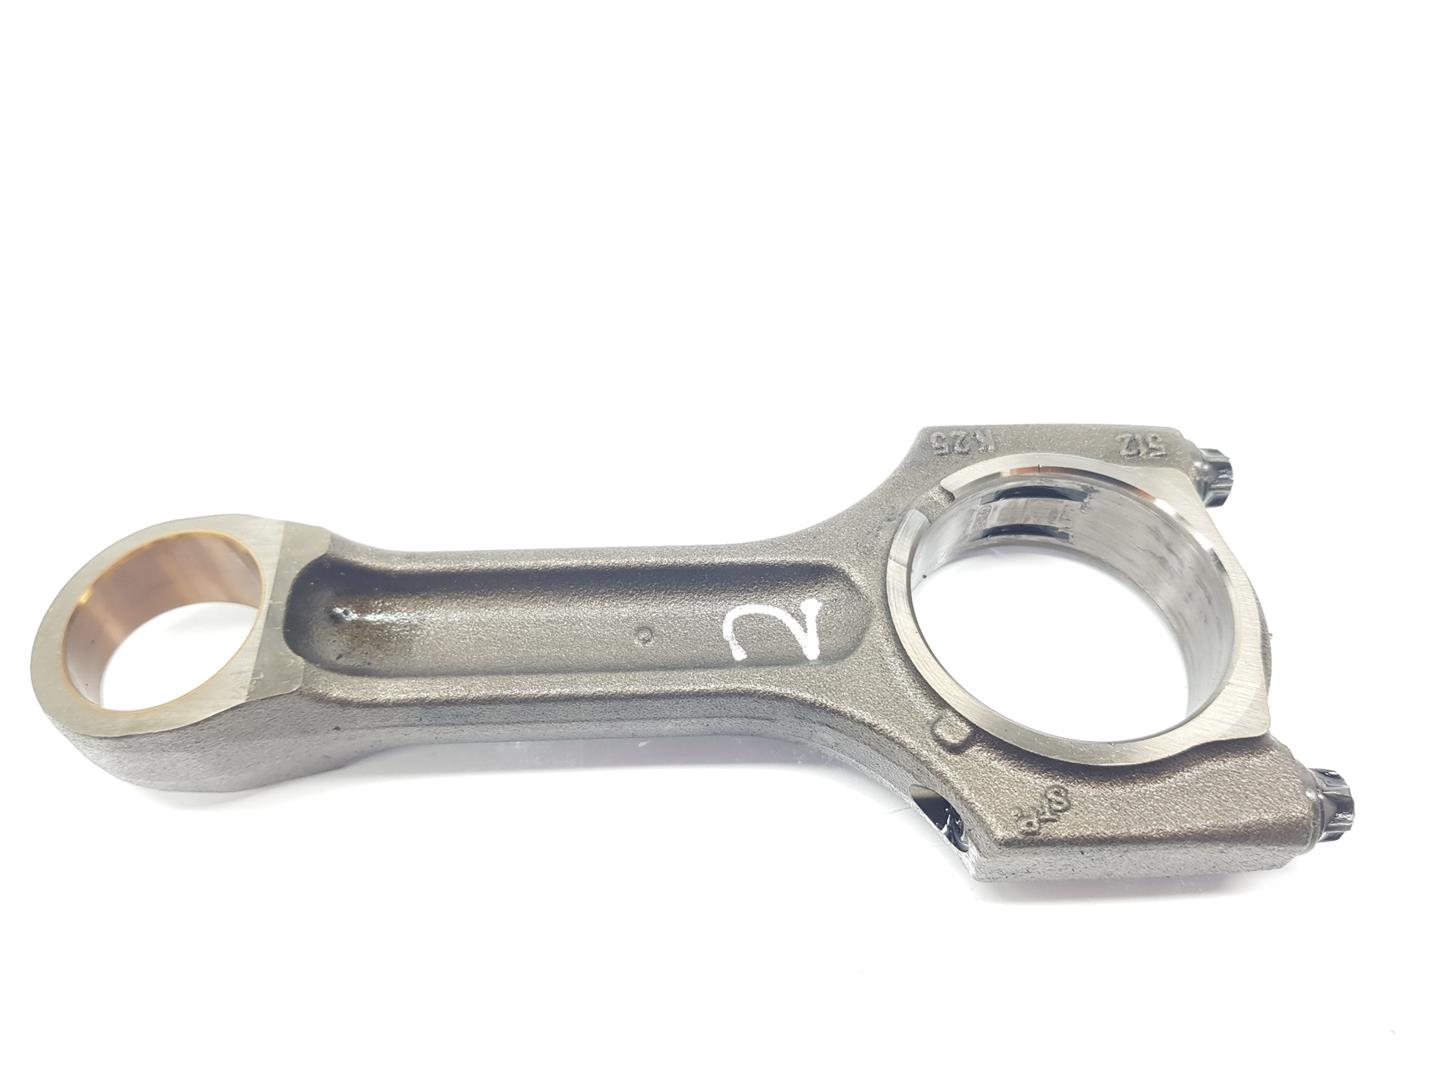 BMW X3 E83 (2003-2010) Connecting Rod 11240308859, 11240308859, 1111AA 24230043